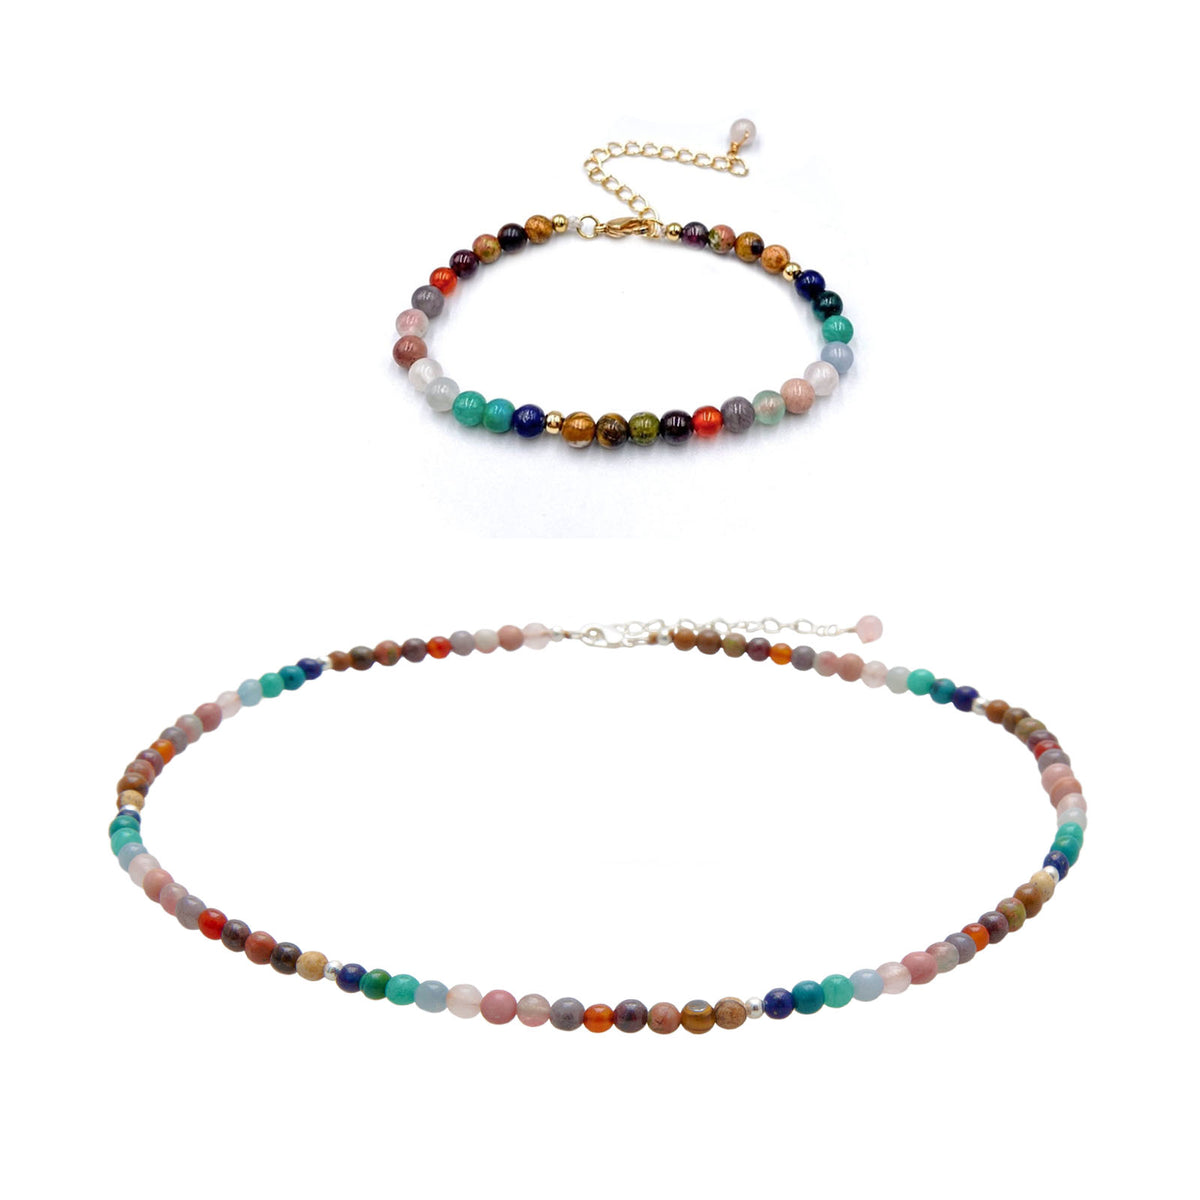 4mm multicolor stone healing necklace and 4mm multicolor stone healing bracelet